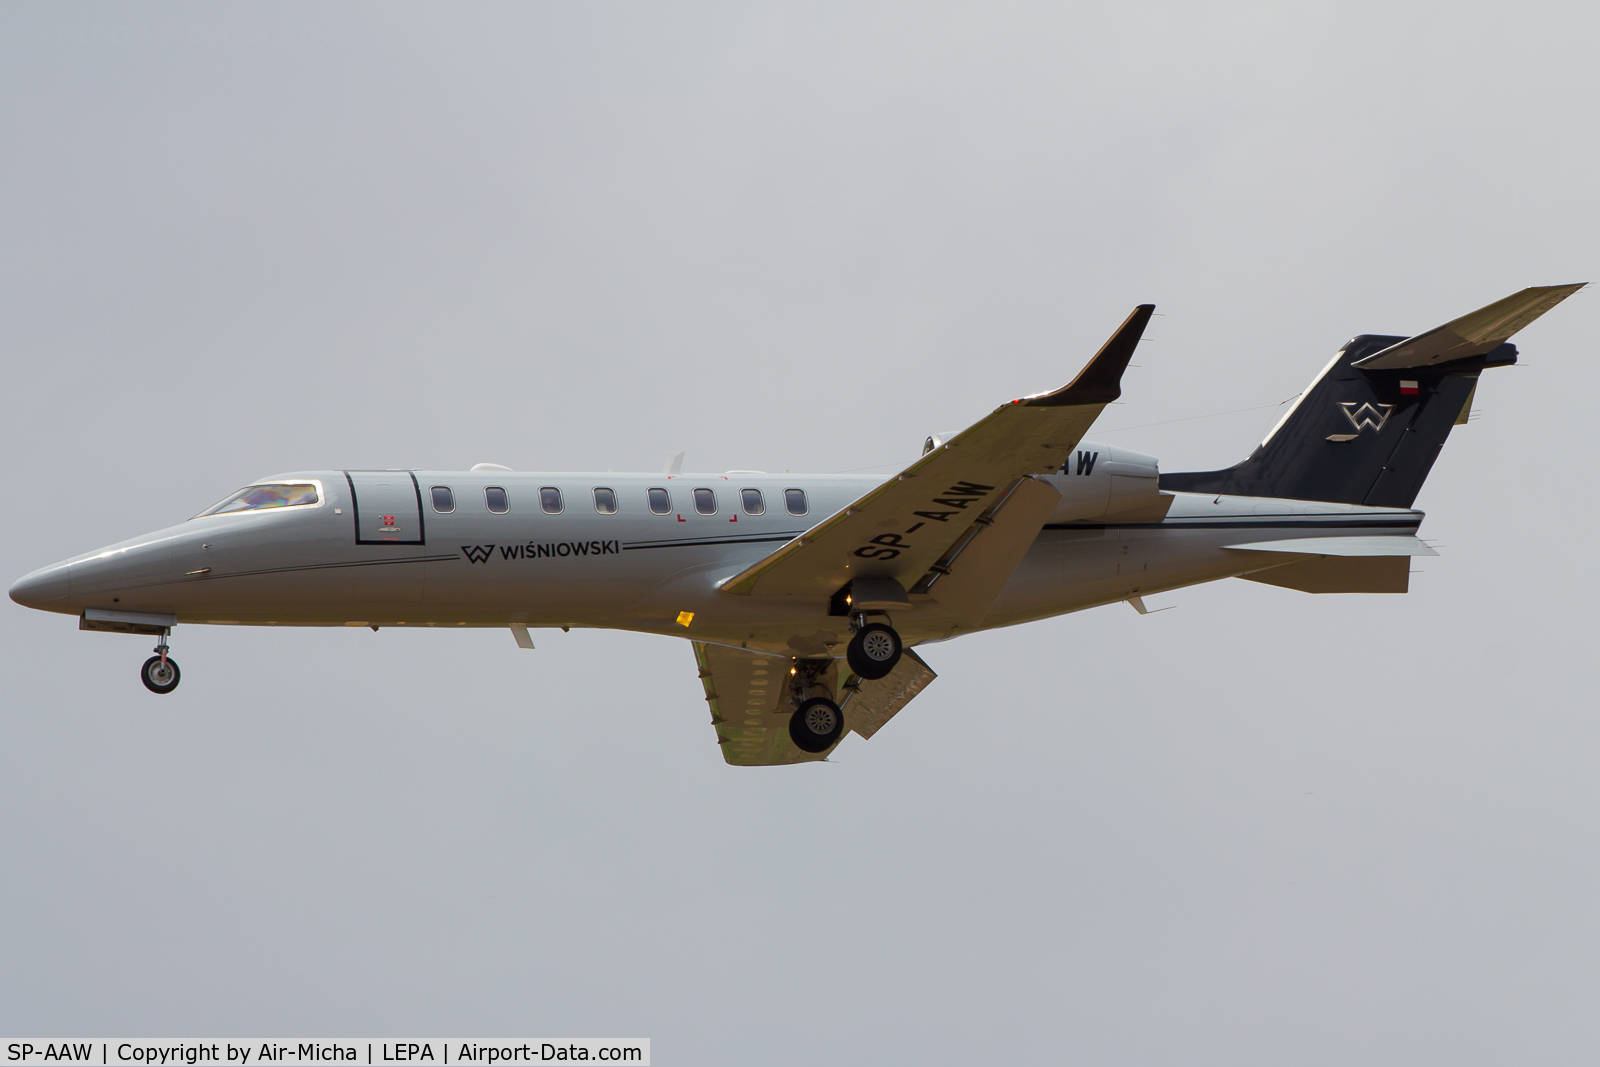 SP-AAW, 2014 Learjet 75 C/N 45-490, Private